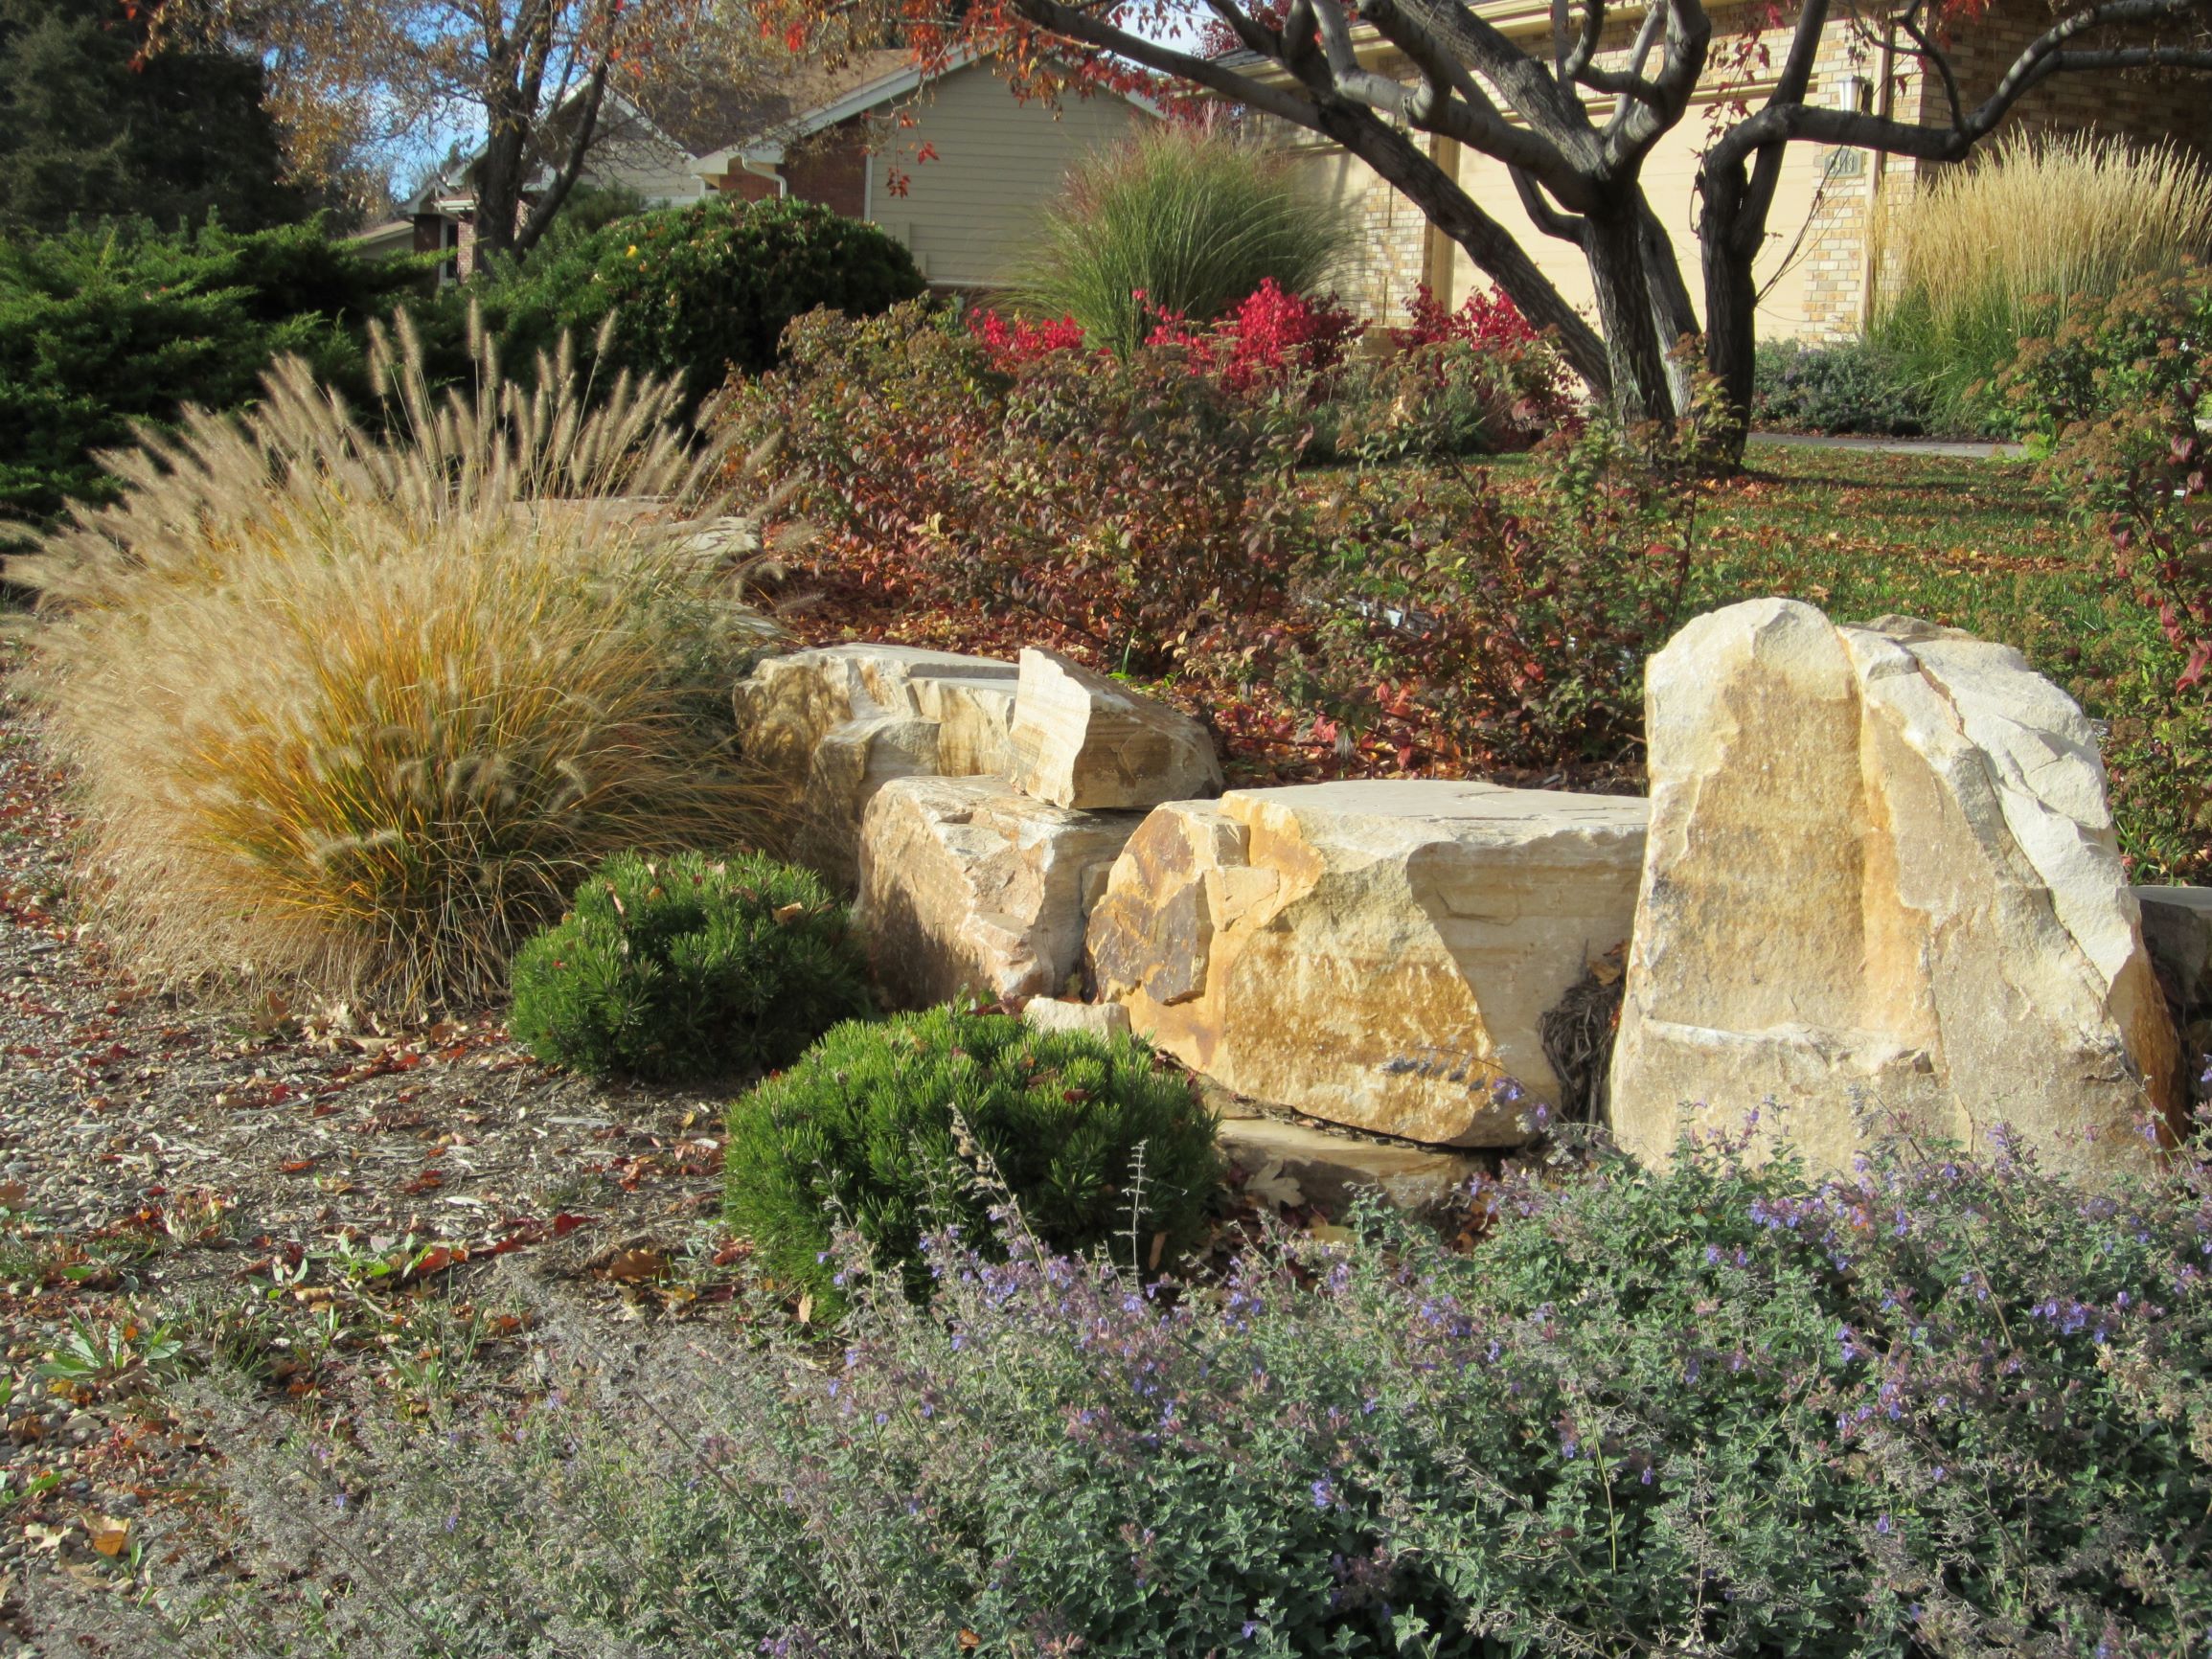 Large decorative rocks surrounded by bushes and plants.